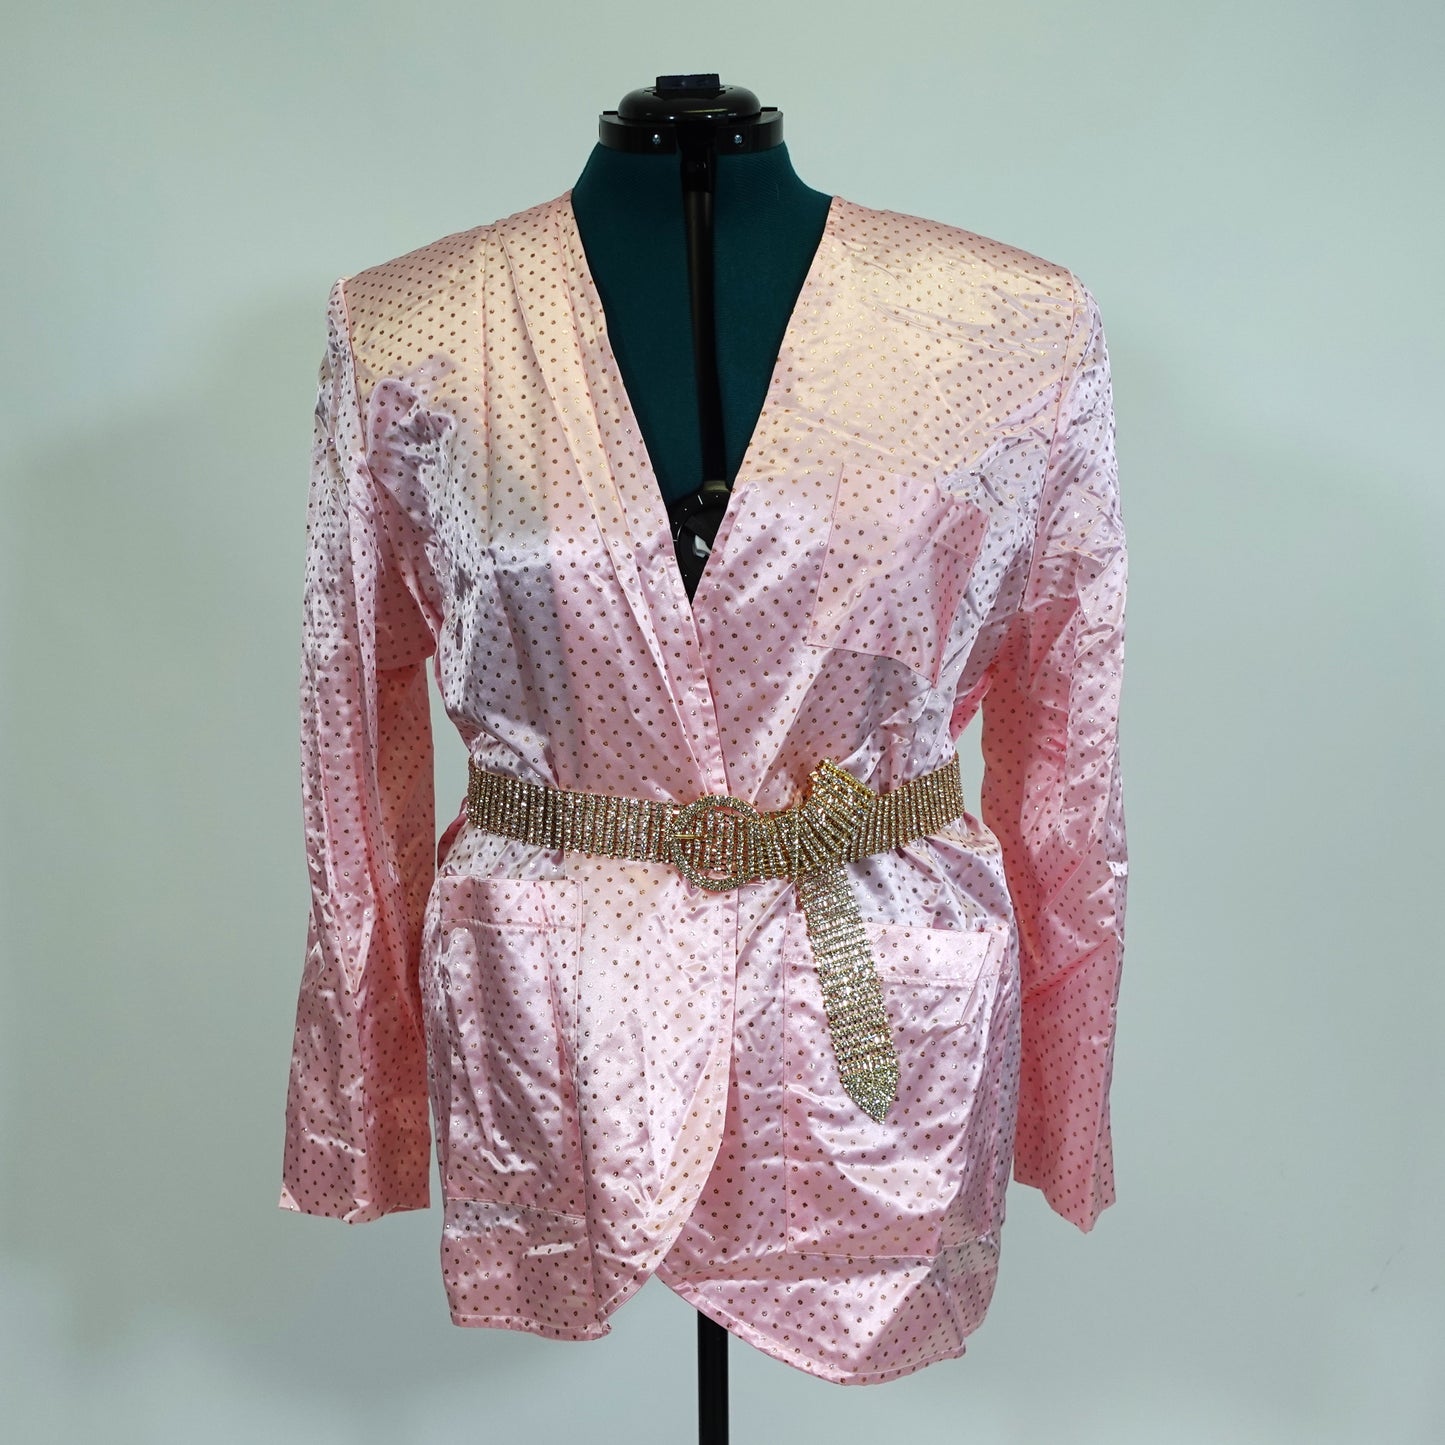 Vintage Pink Satin Blazer with Gold Glitter Dots (Belt Not Included)